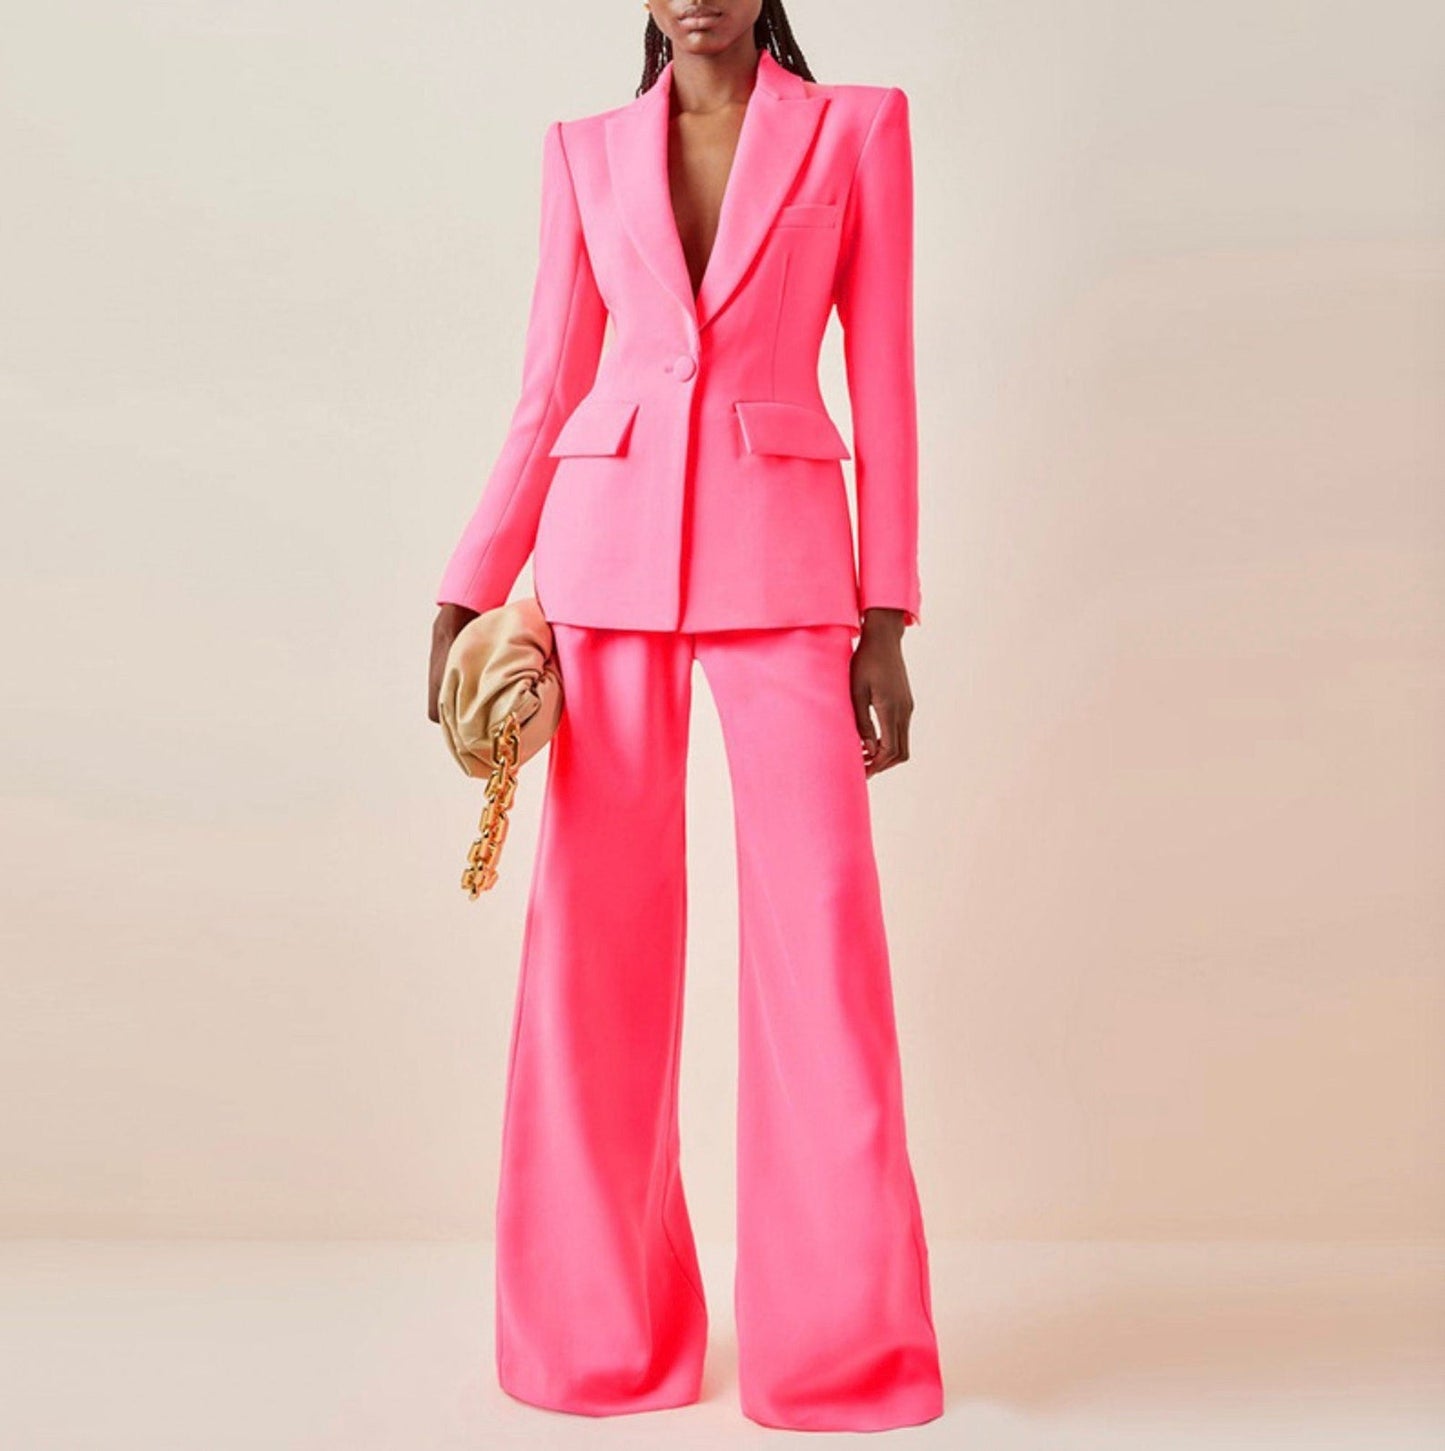 FashionPioneer - Hot Pink Blazer Trouser Suit Set for Women ,wear this blazer with the matching bottoms and complete the look with a lace bralet and your highest heels. we've got Blazers for Women who wanna bring a new kinda energy to their outfits. Team a double breasted blazers with some heel boots, or get on board with the oversized trend and go for longline pieces for an edgy vibe.